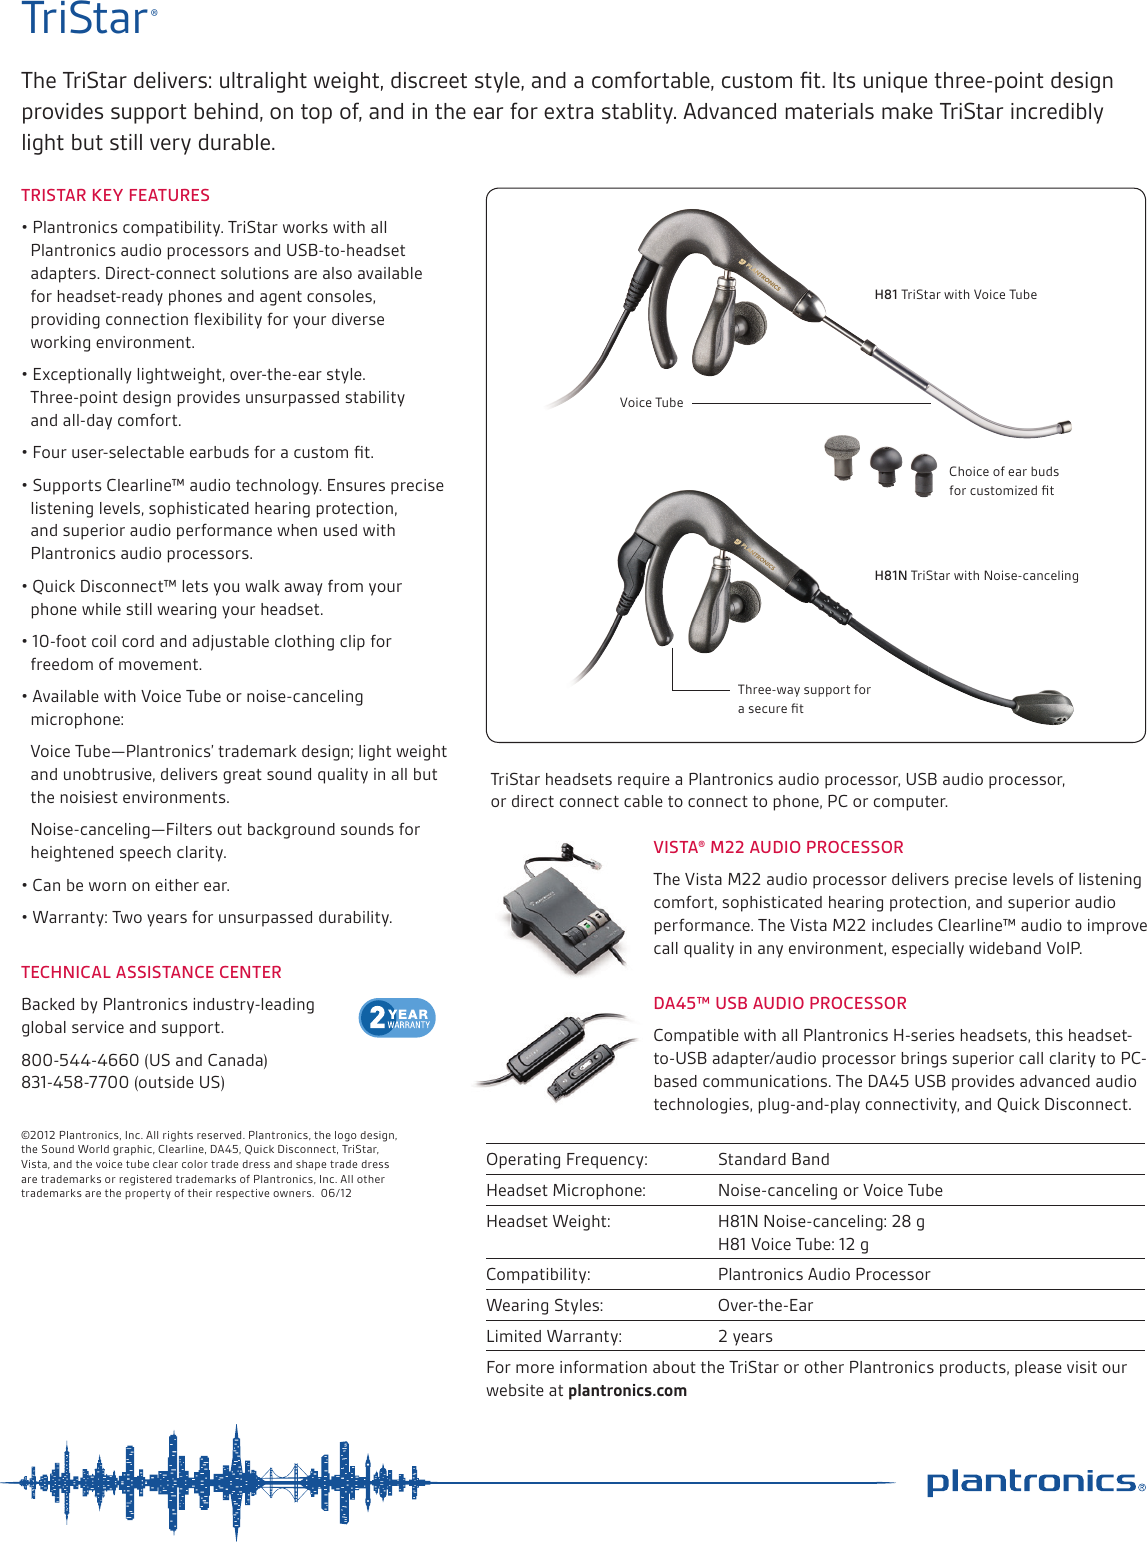 Page 2 of 2 - Plantronics 1151_TriStar_PS_060112 Tristar-ps